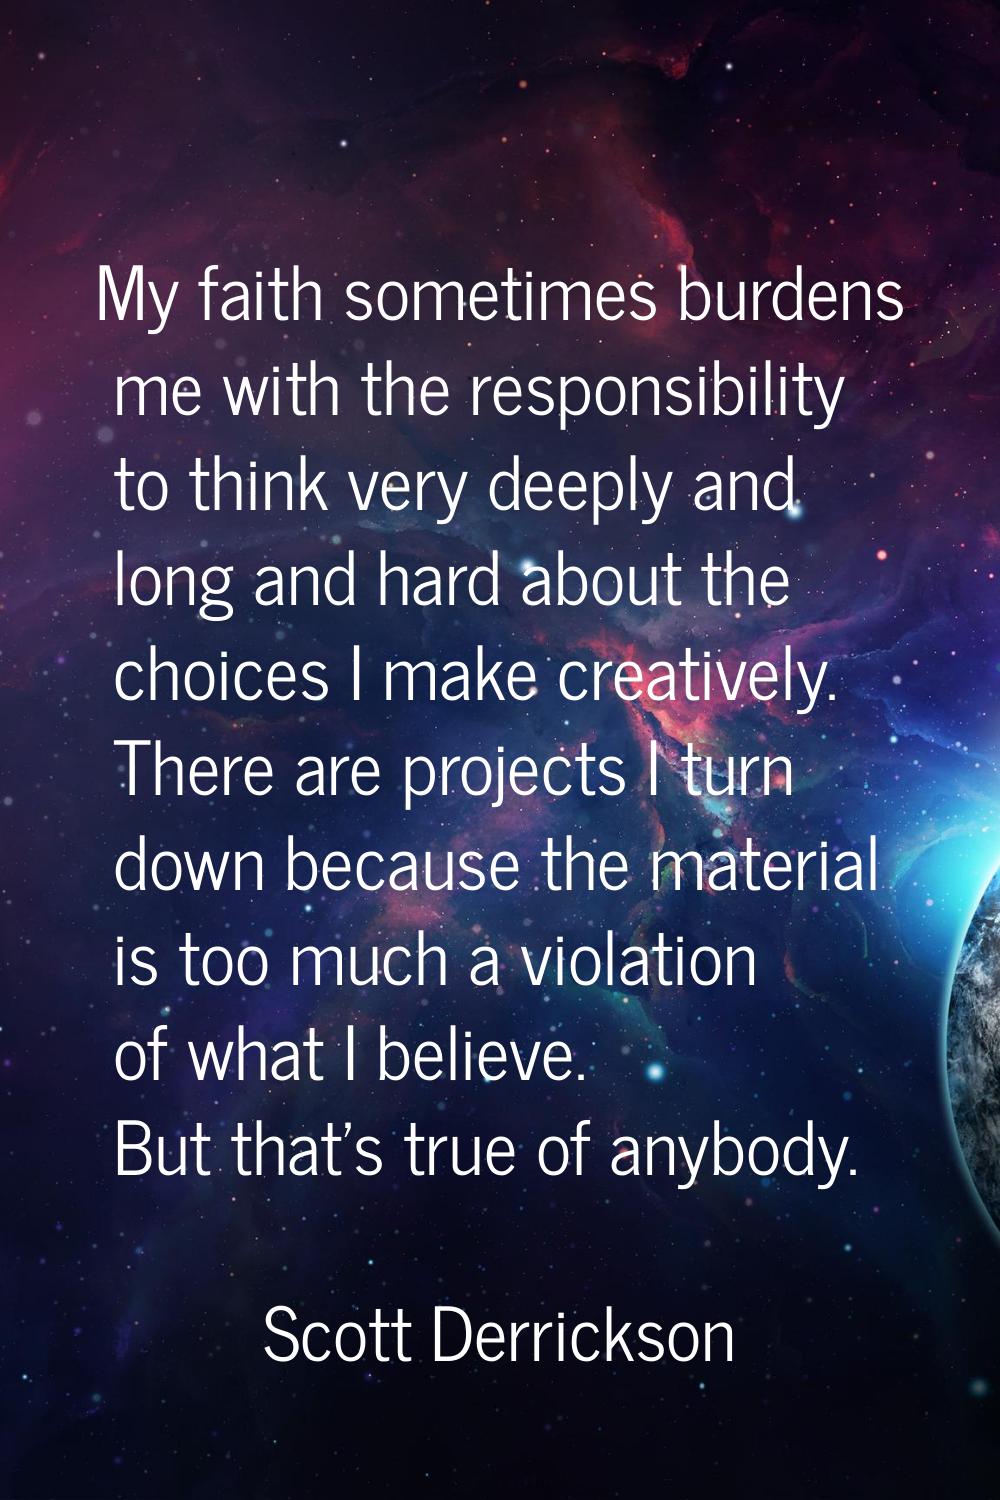 My faith sometimes burdens me with the responsibility to think very deeply and long and hard about 